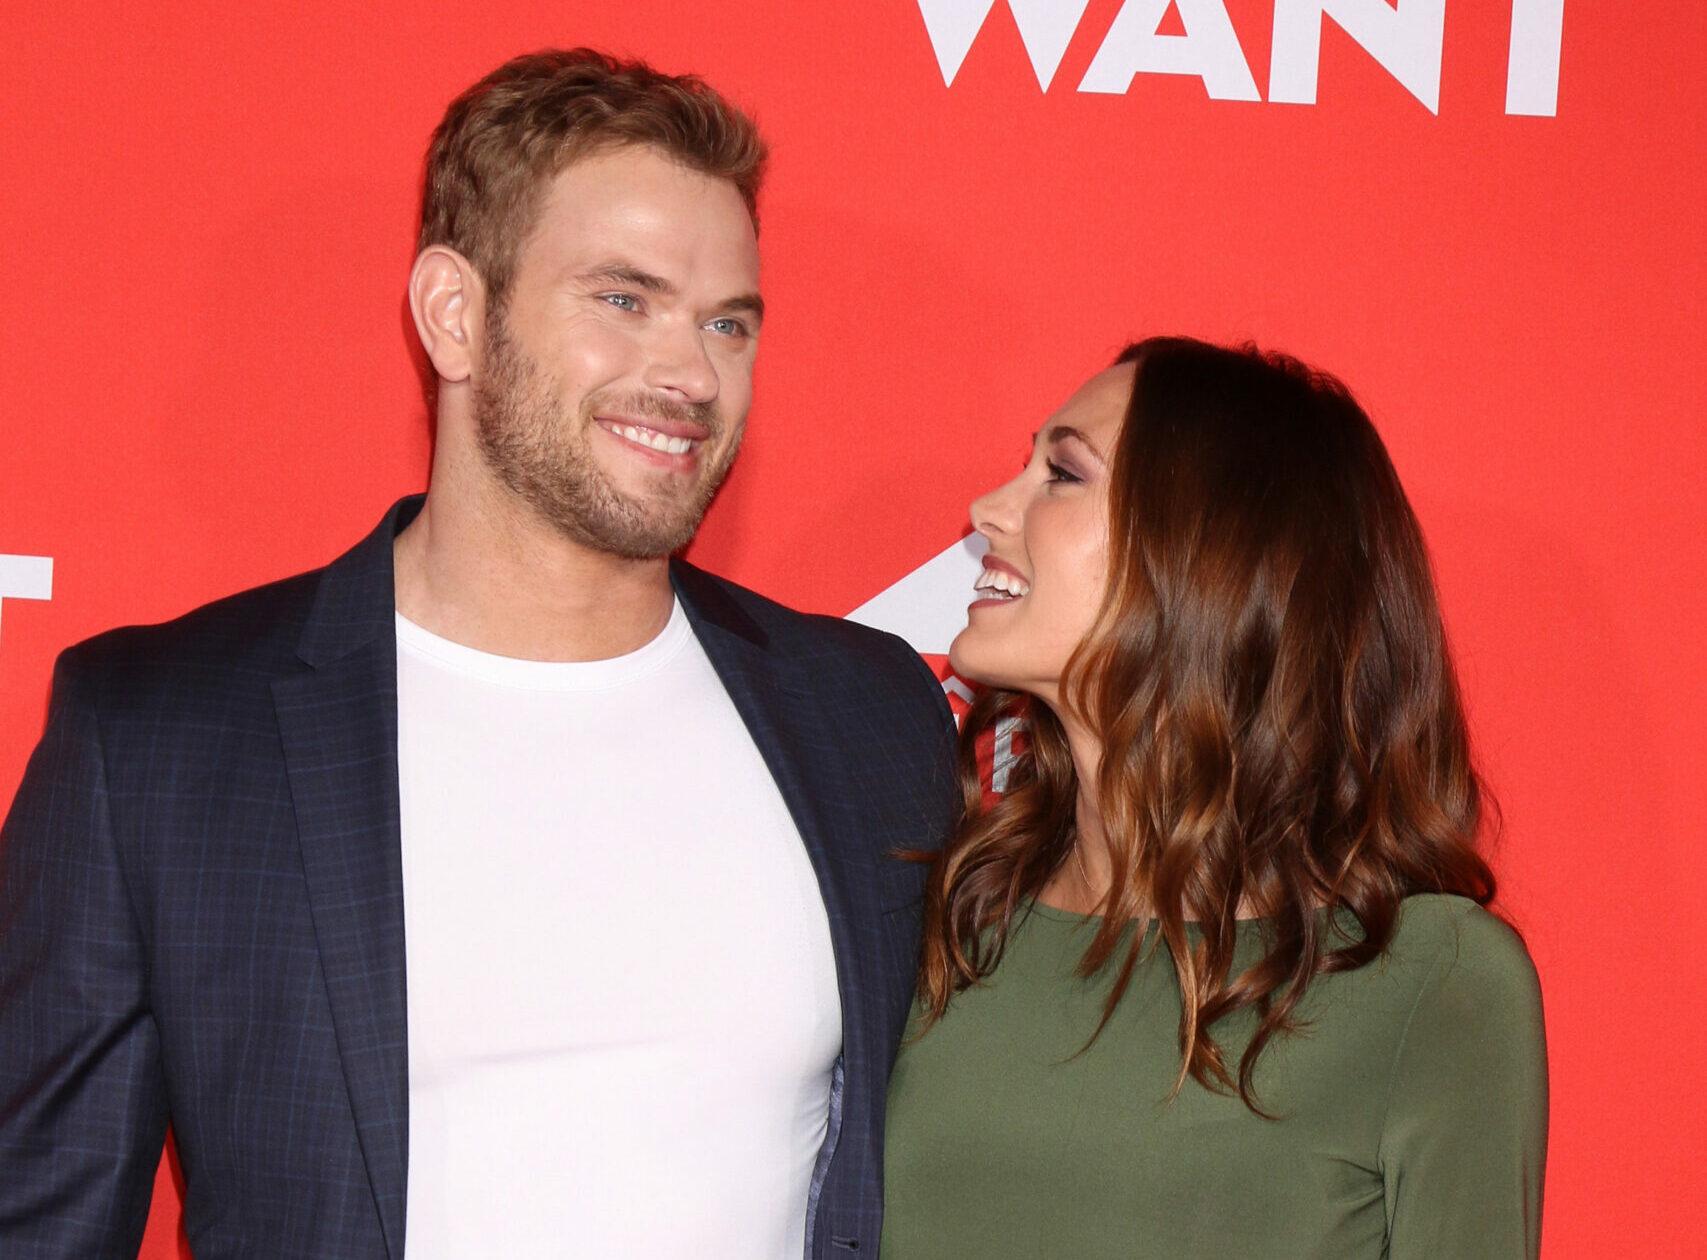 Kellan Lutz, Brittany Gonzales at the "What Men Want" Premiere